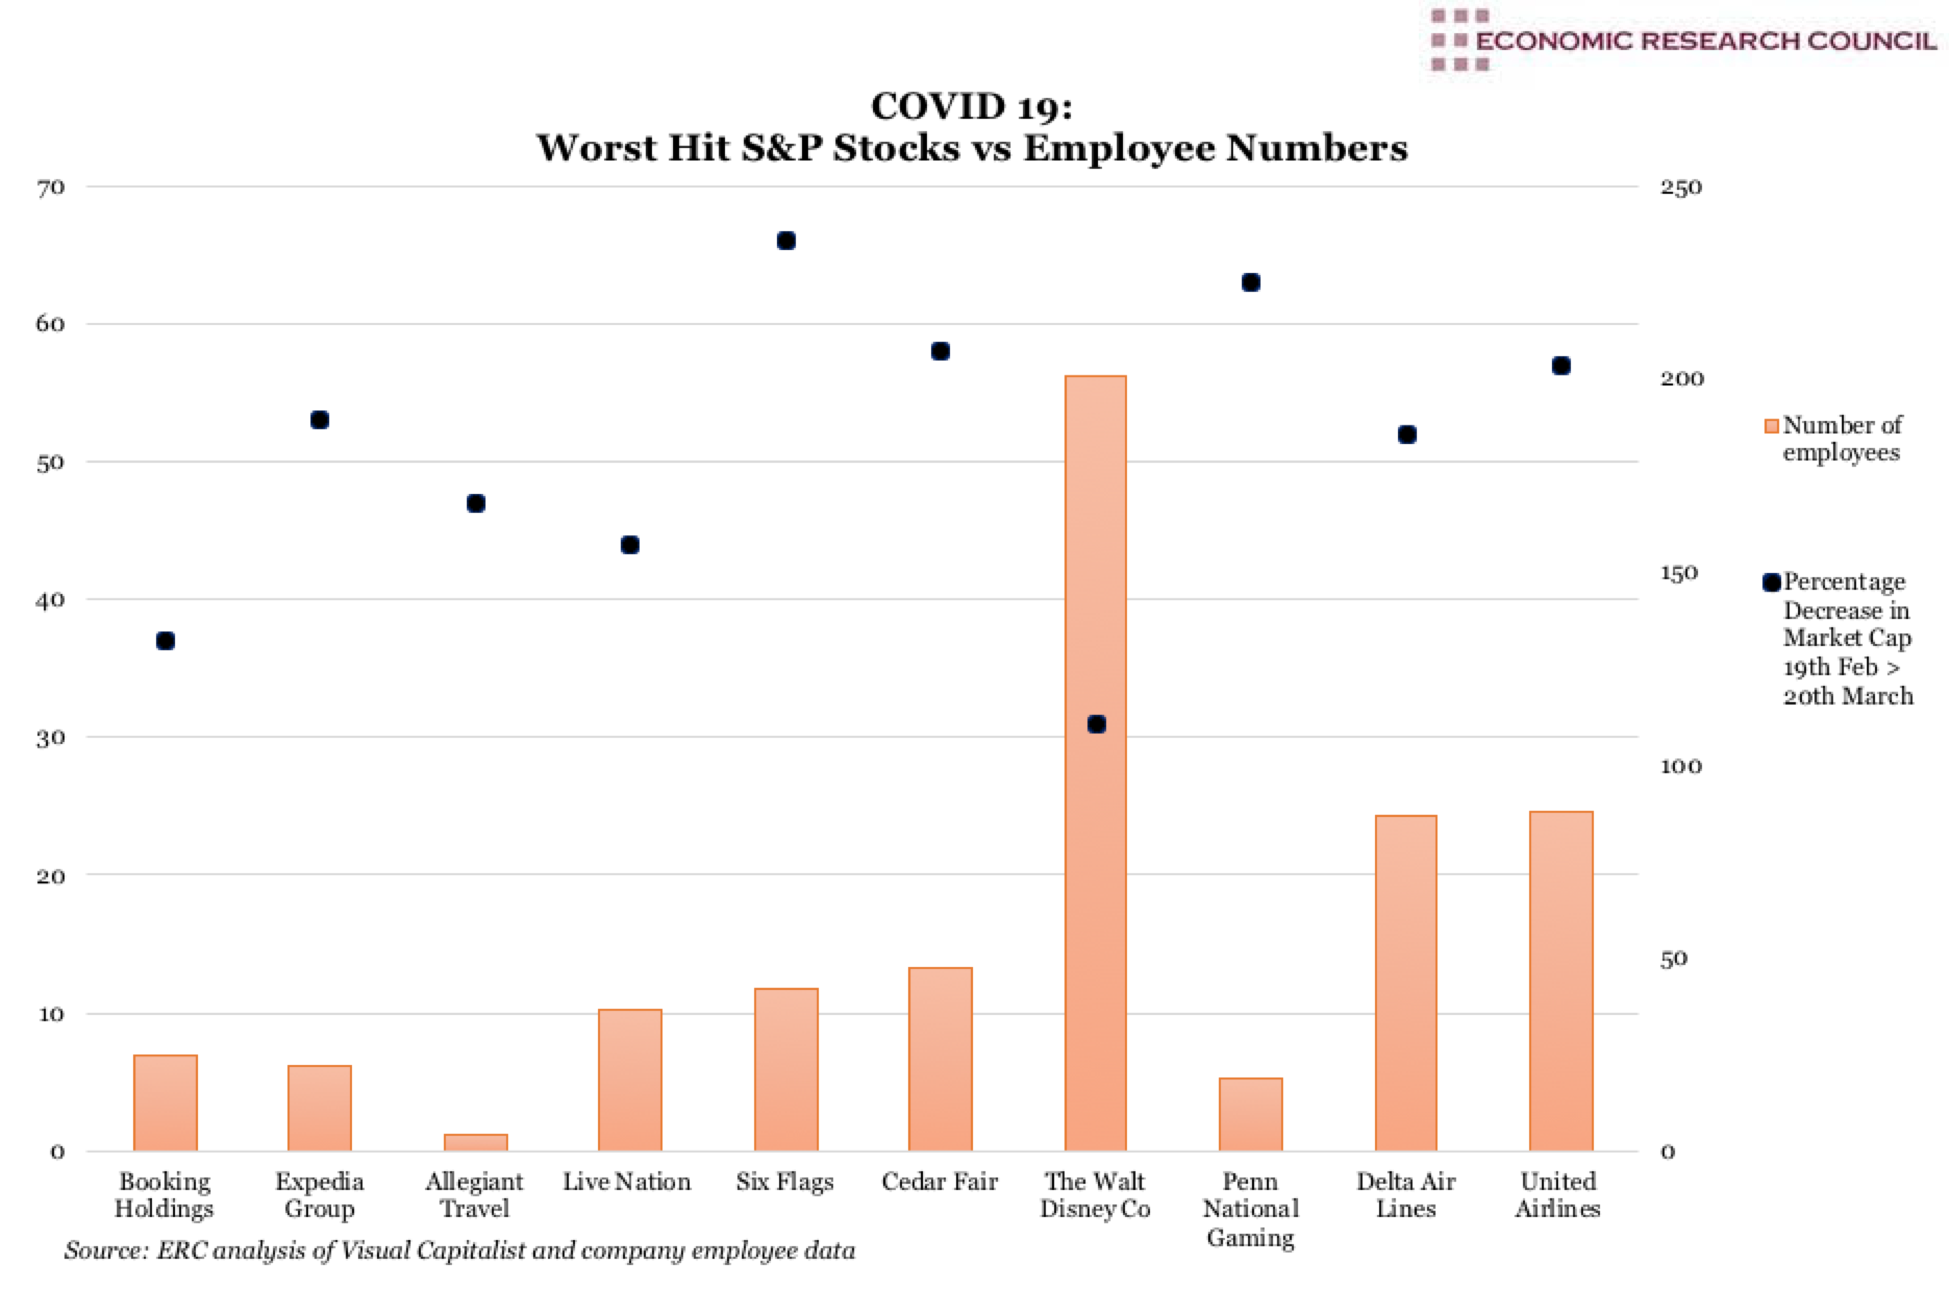 Covid 19: The Worst Hit Stocks vs Employee Numbers 